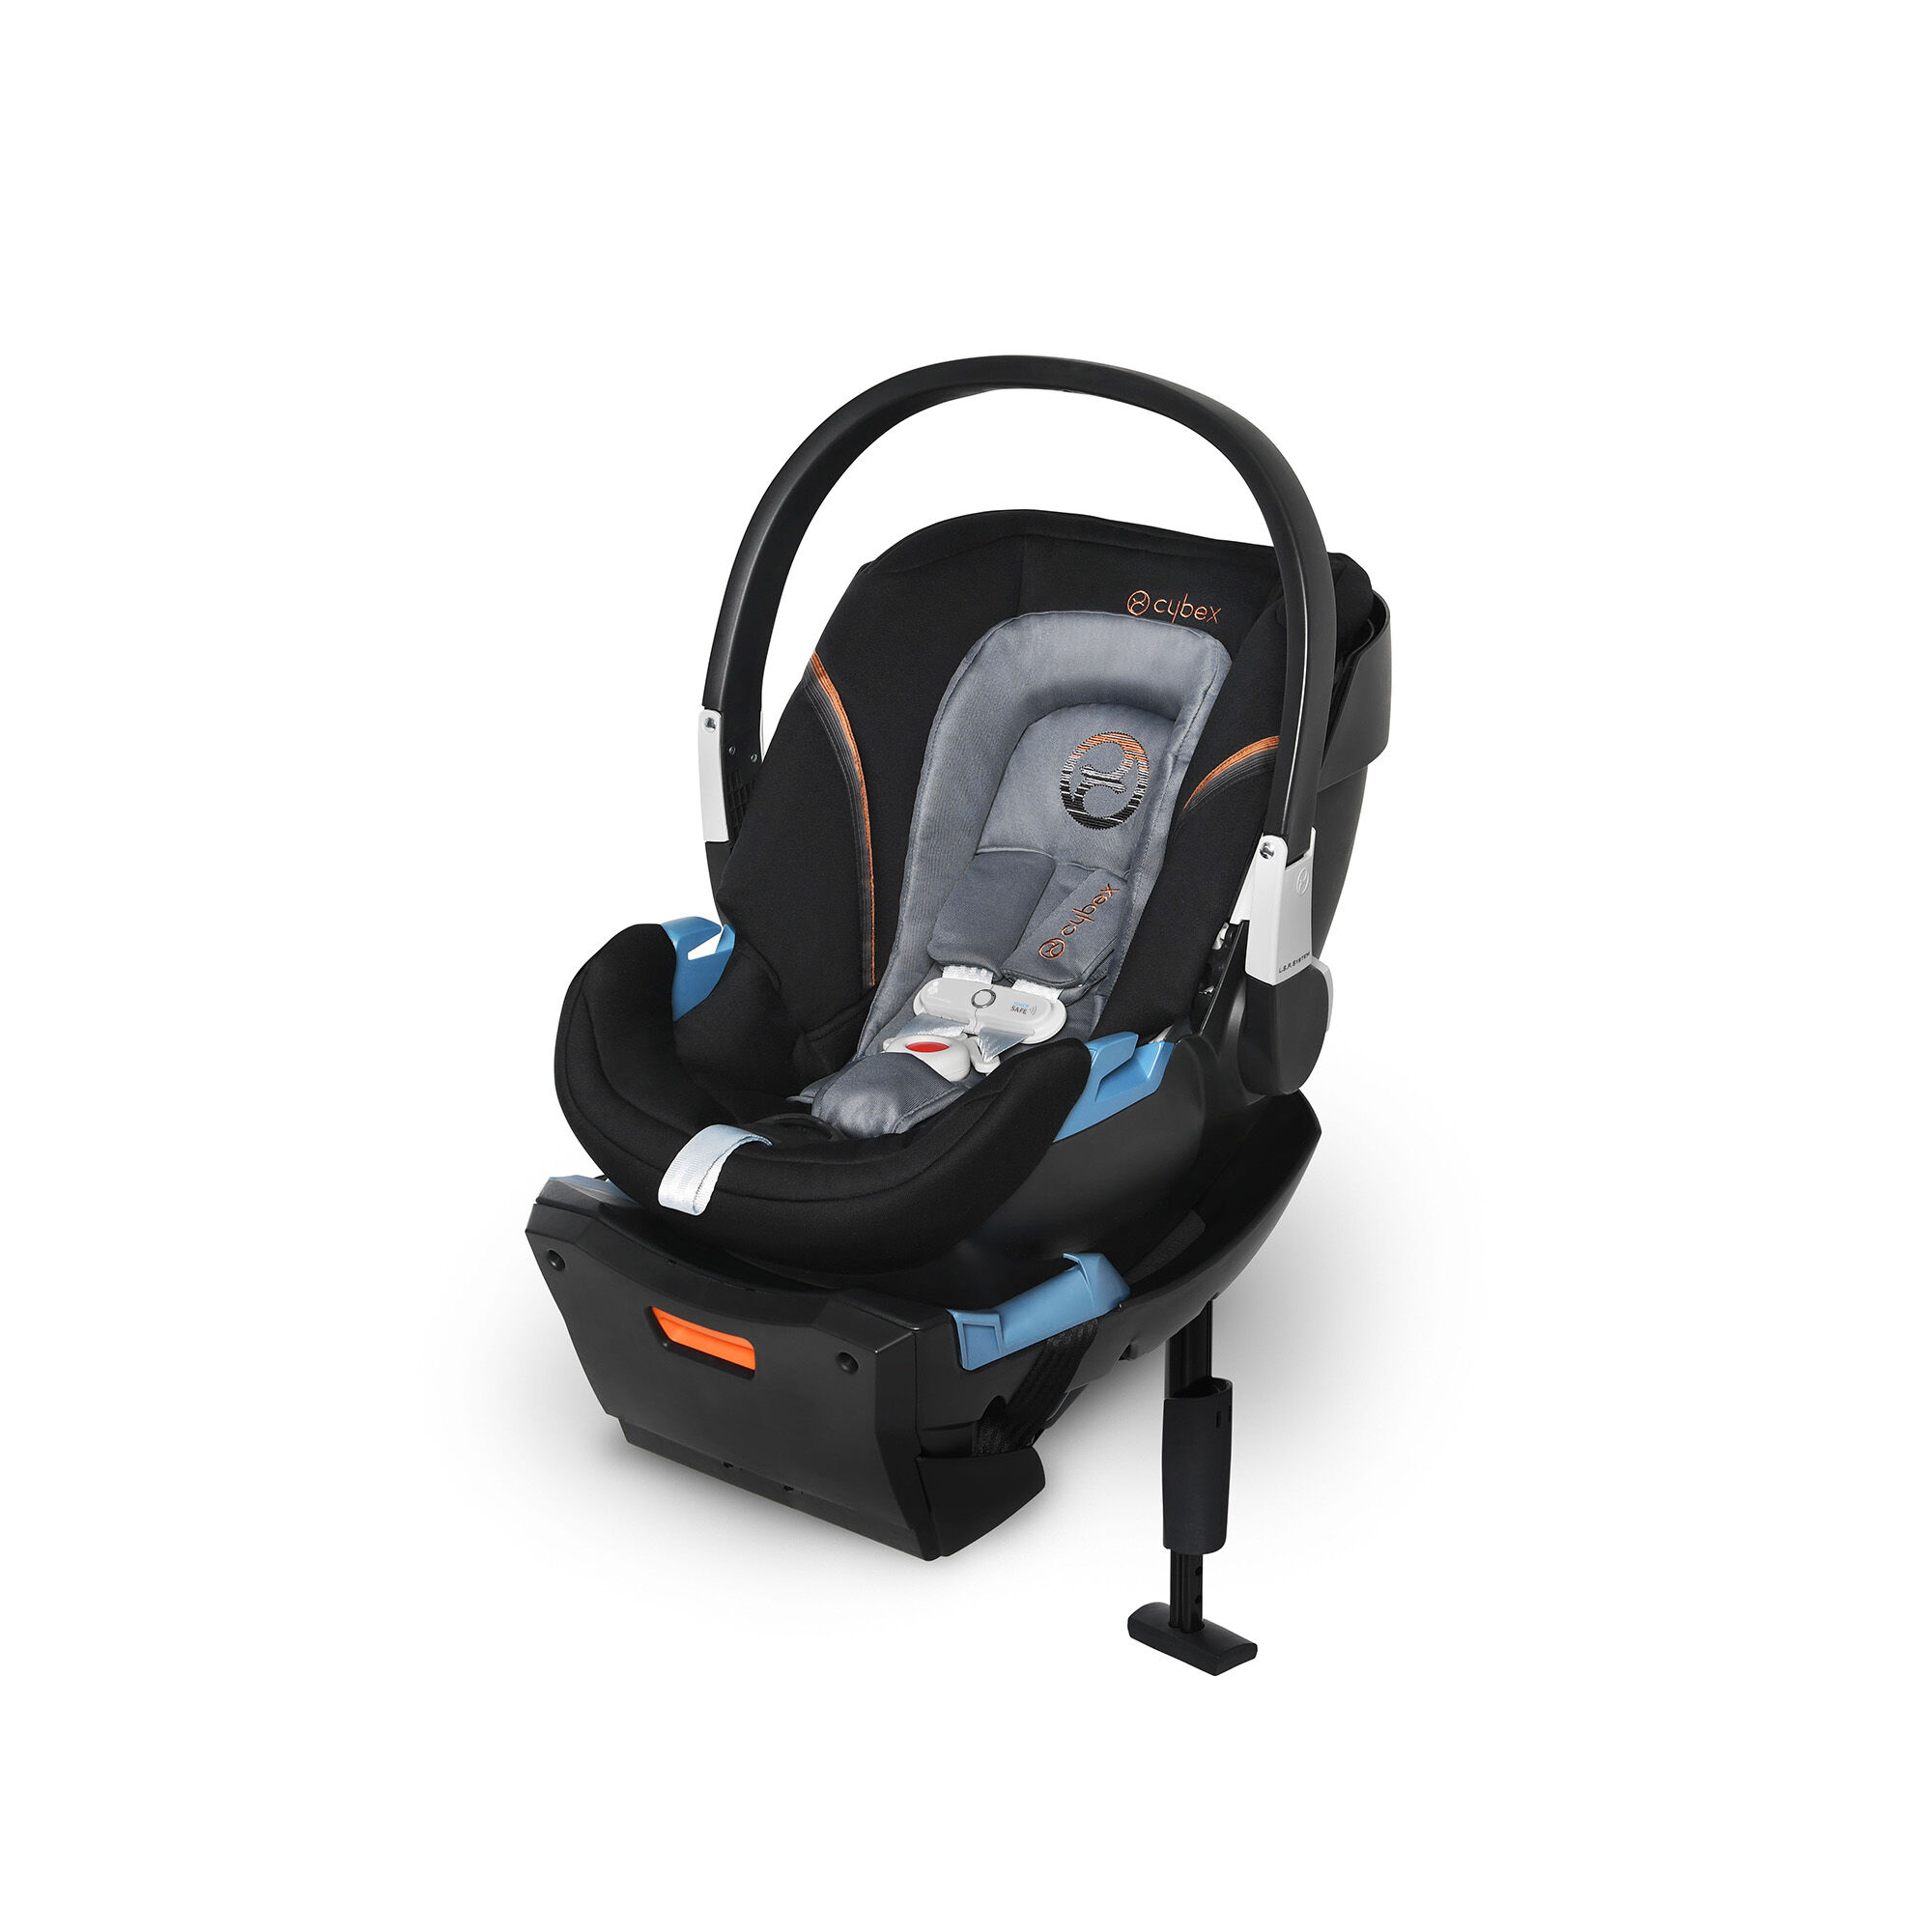 CYBEX EOS Travel System | Official CYBEX Website